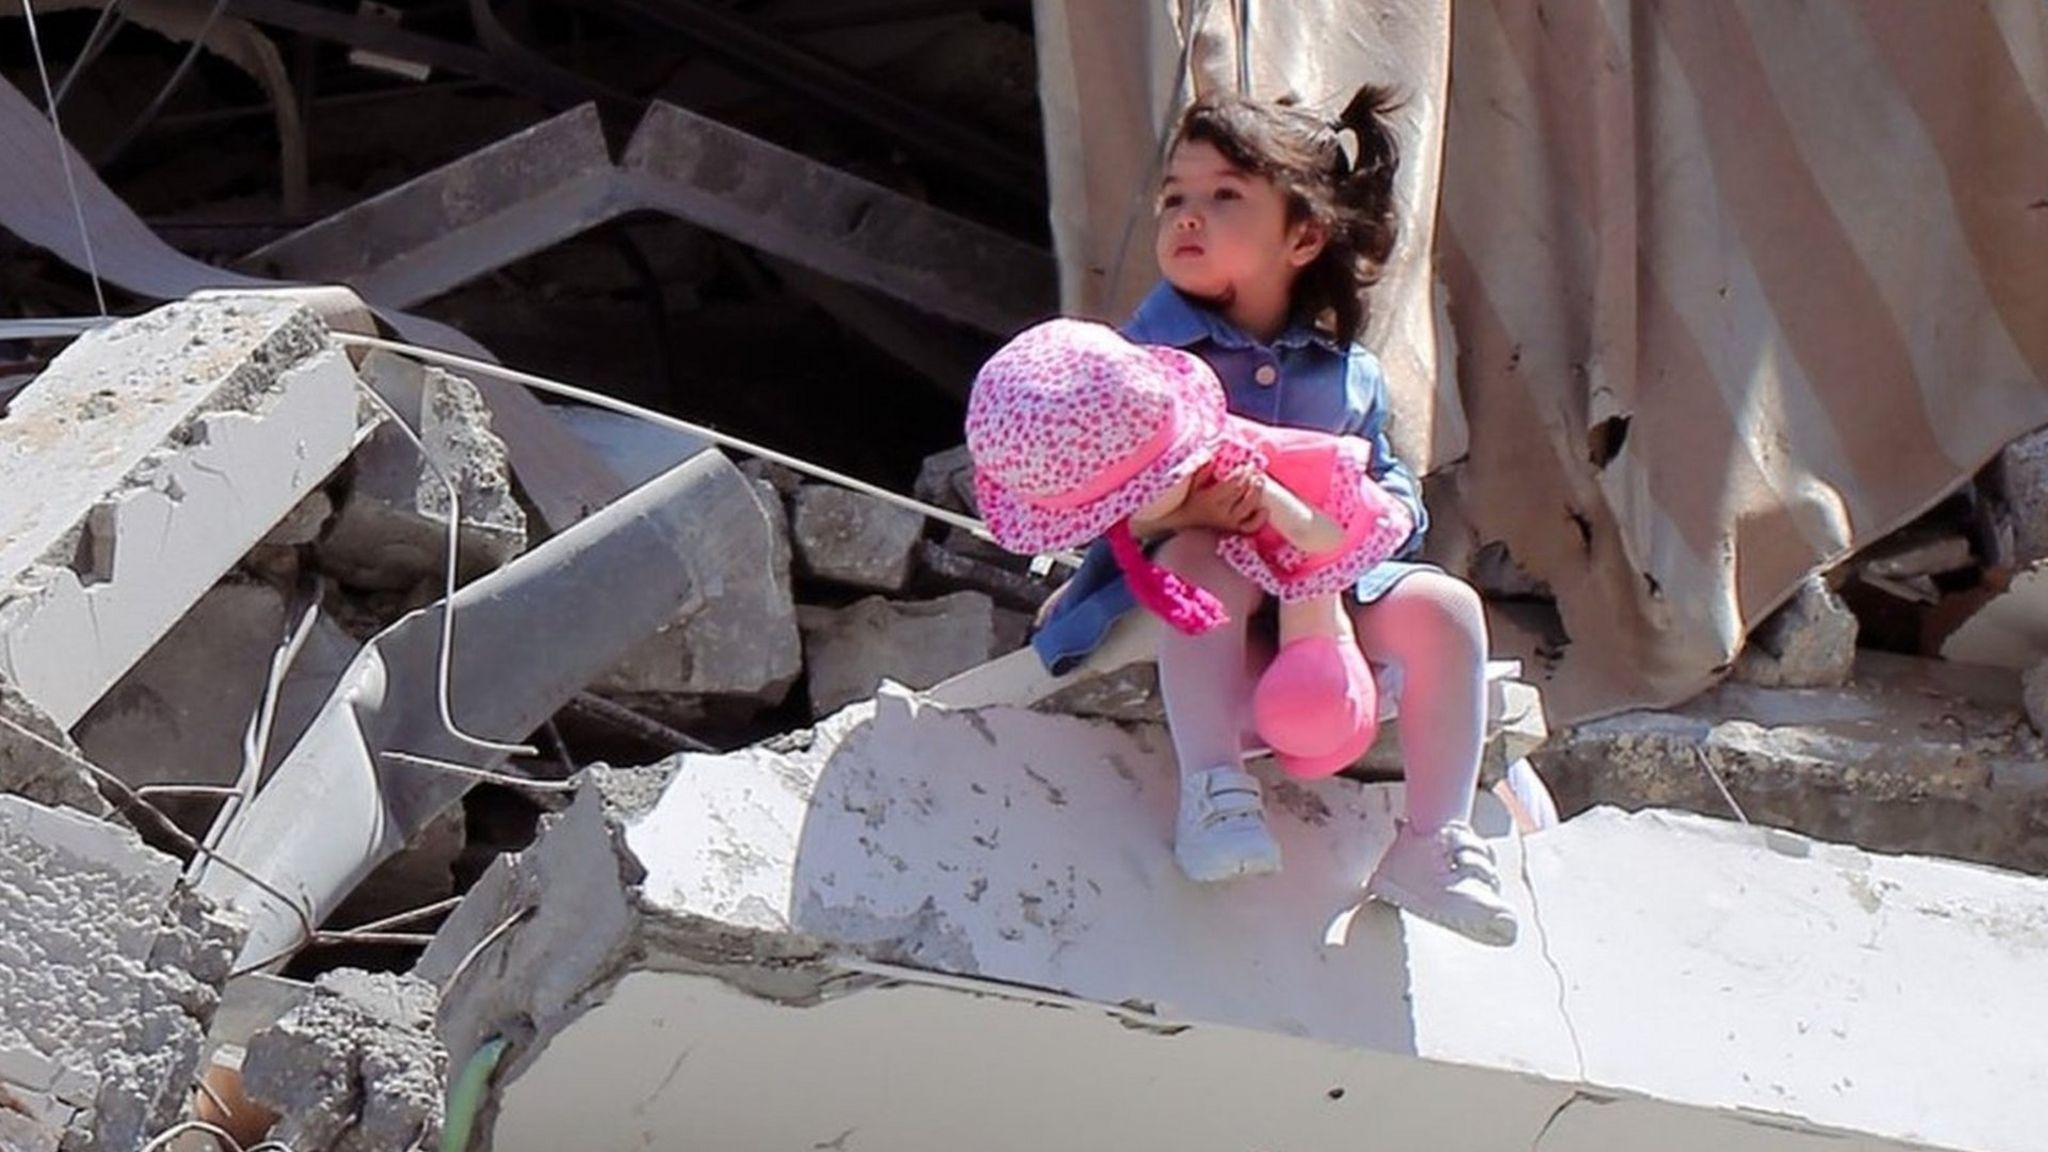 Celine by Shaban El Sousi - a photo showing a two-year-old Palestinian girl sitting on the ruins of a tower block in Gaza in May 2021